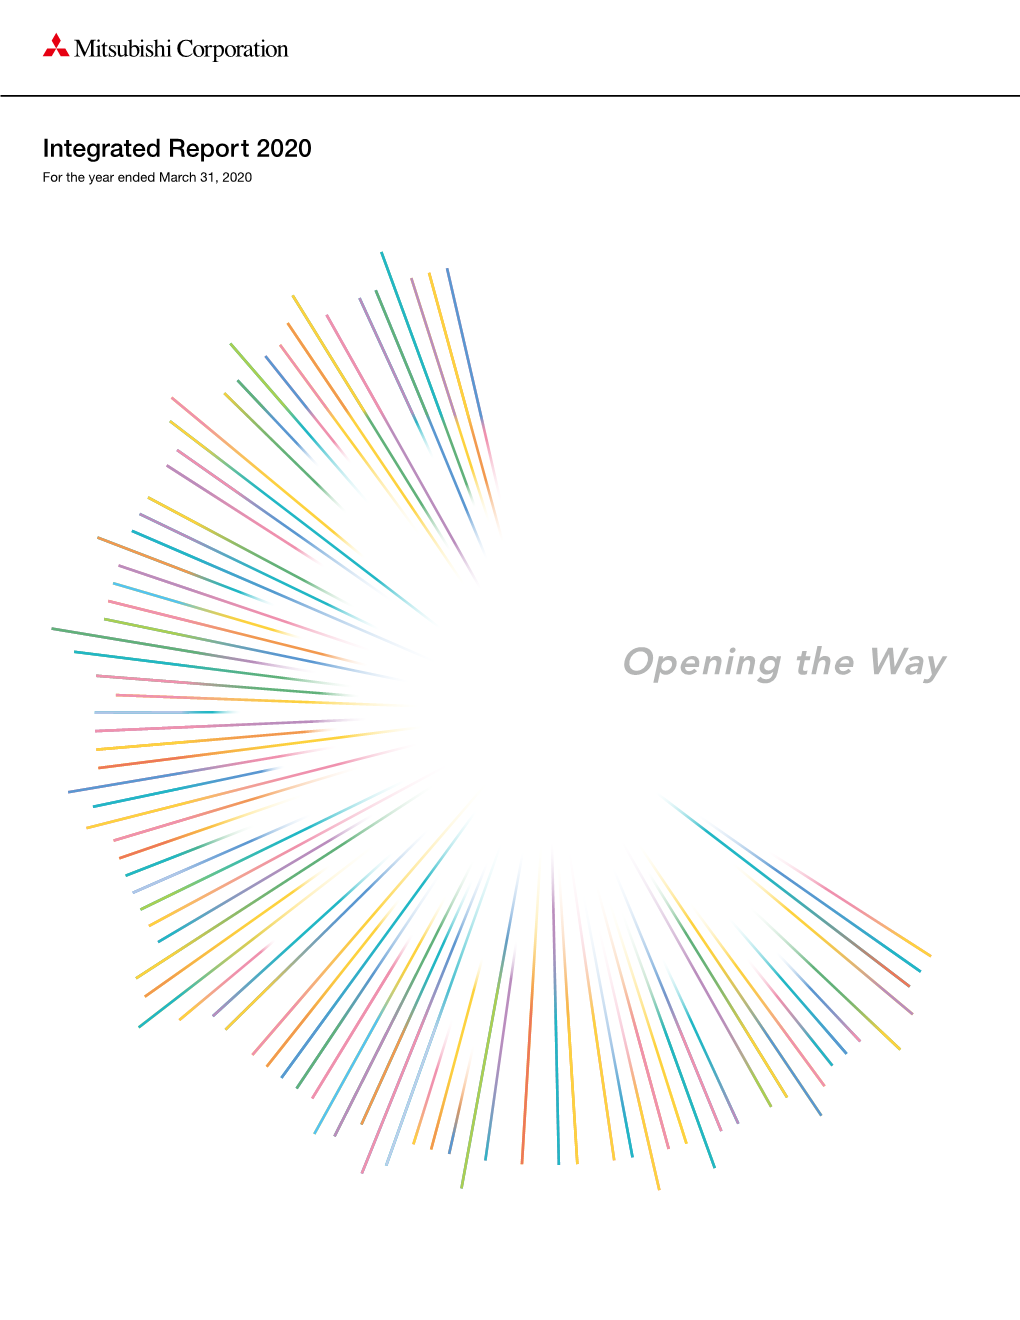 Opening the Way